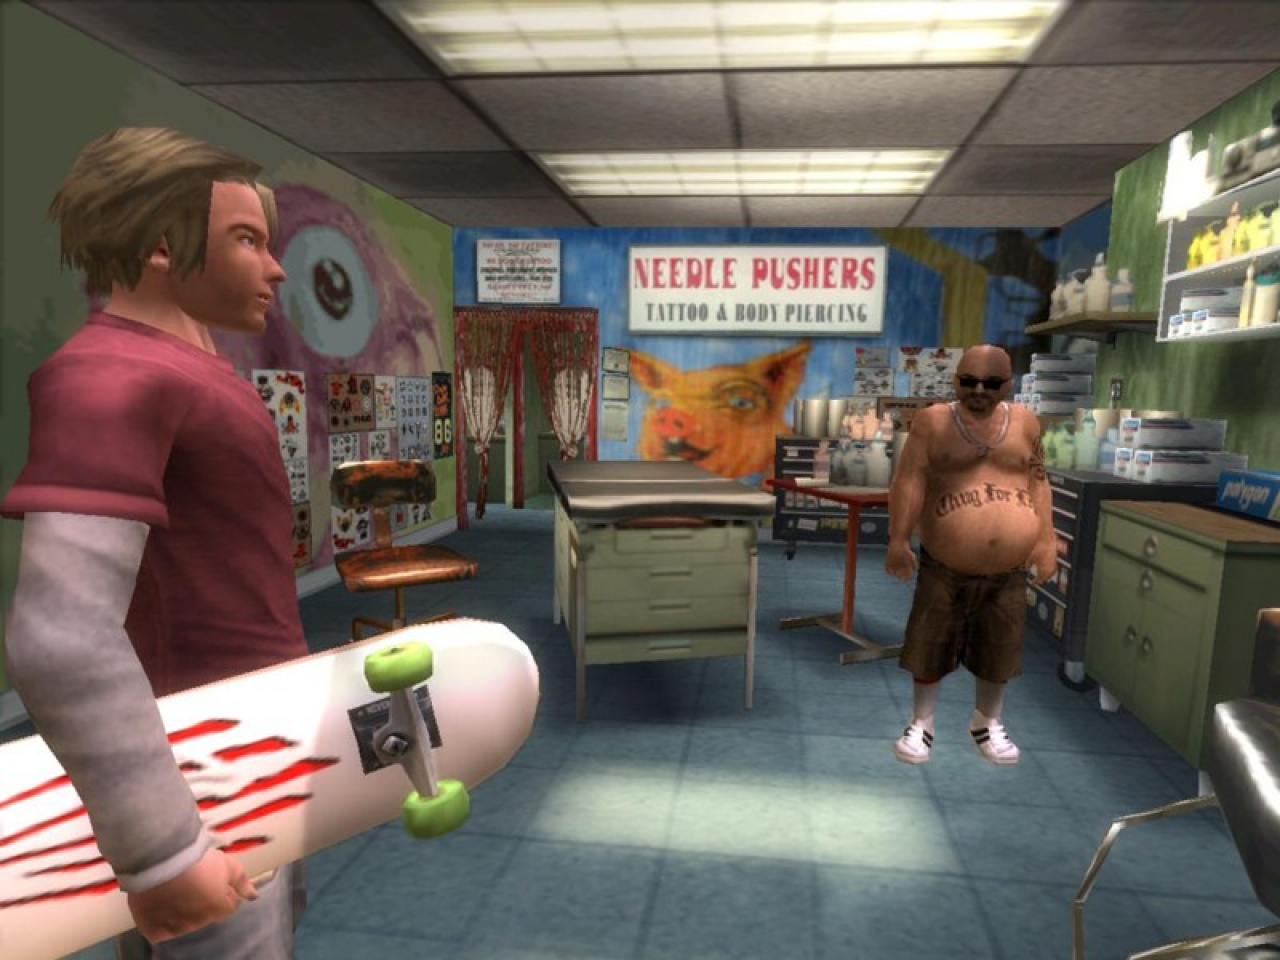 Tony Hawk's American Wasteland screenshots, images and pictures